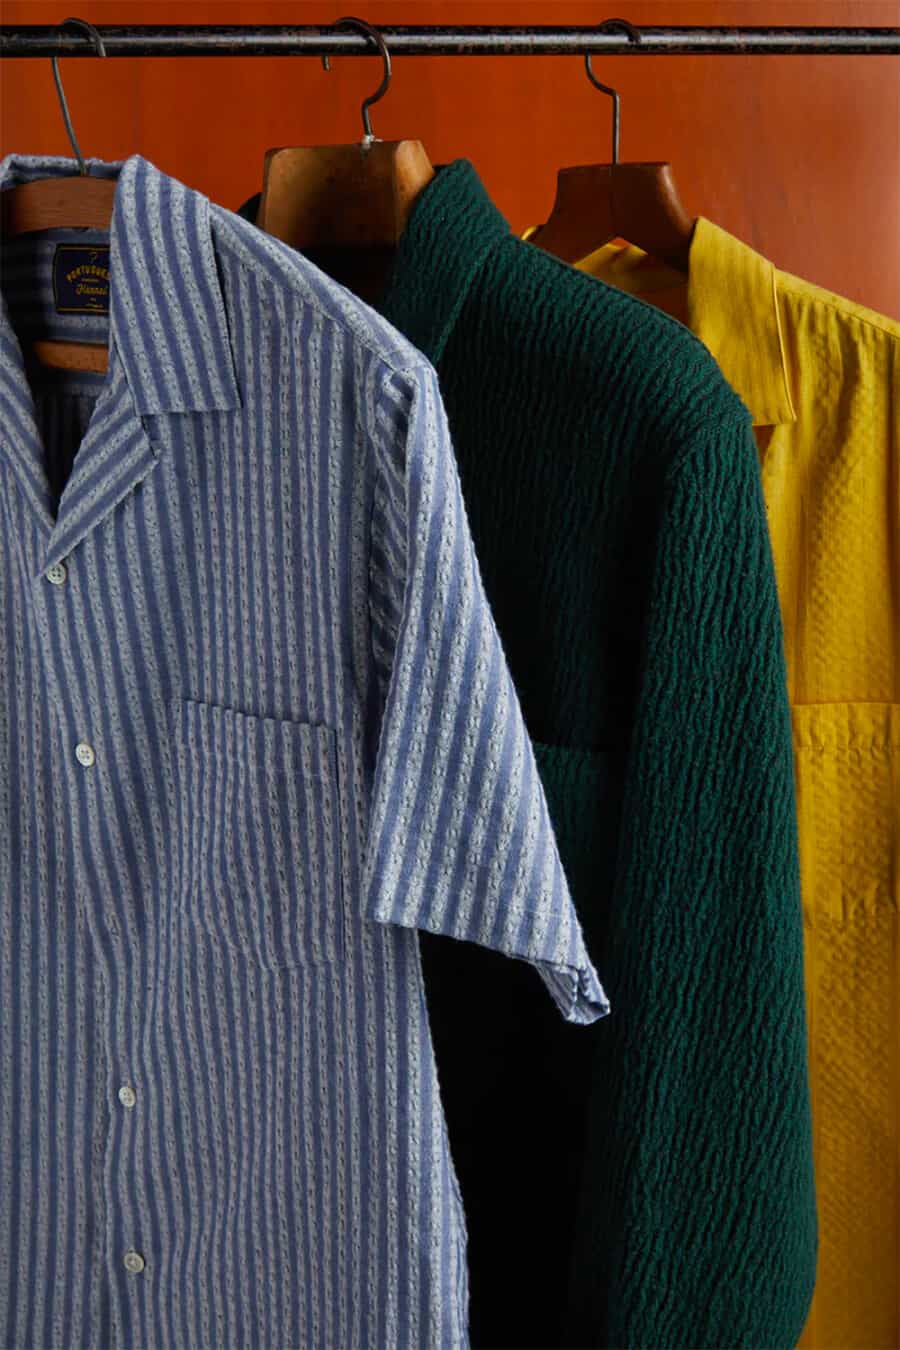 Three seersucker men's summer shirts in yellow, green and blue/white stripe hanging on a clothes rail